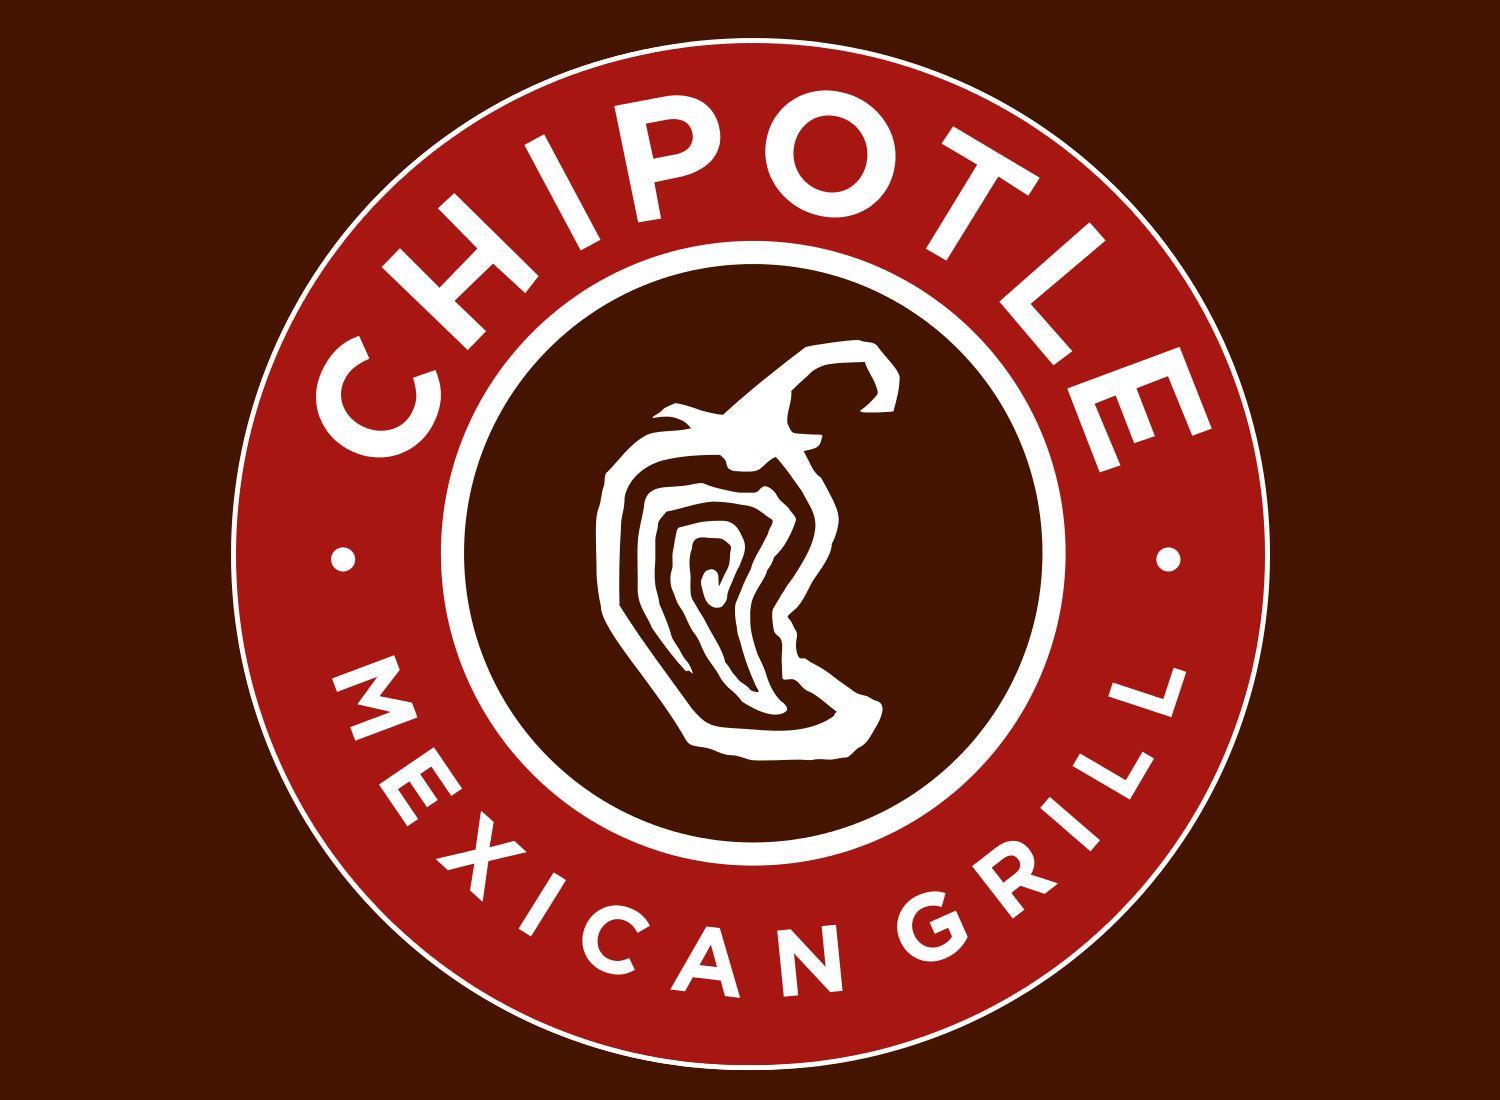 Chipotle Logo - Chipotle Logo, Chipotle Symbol, Meaning, History and Evolution